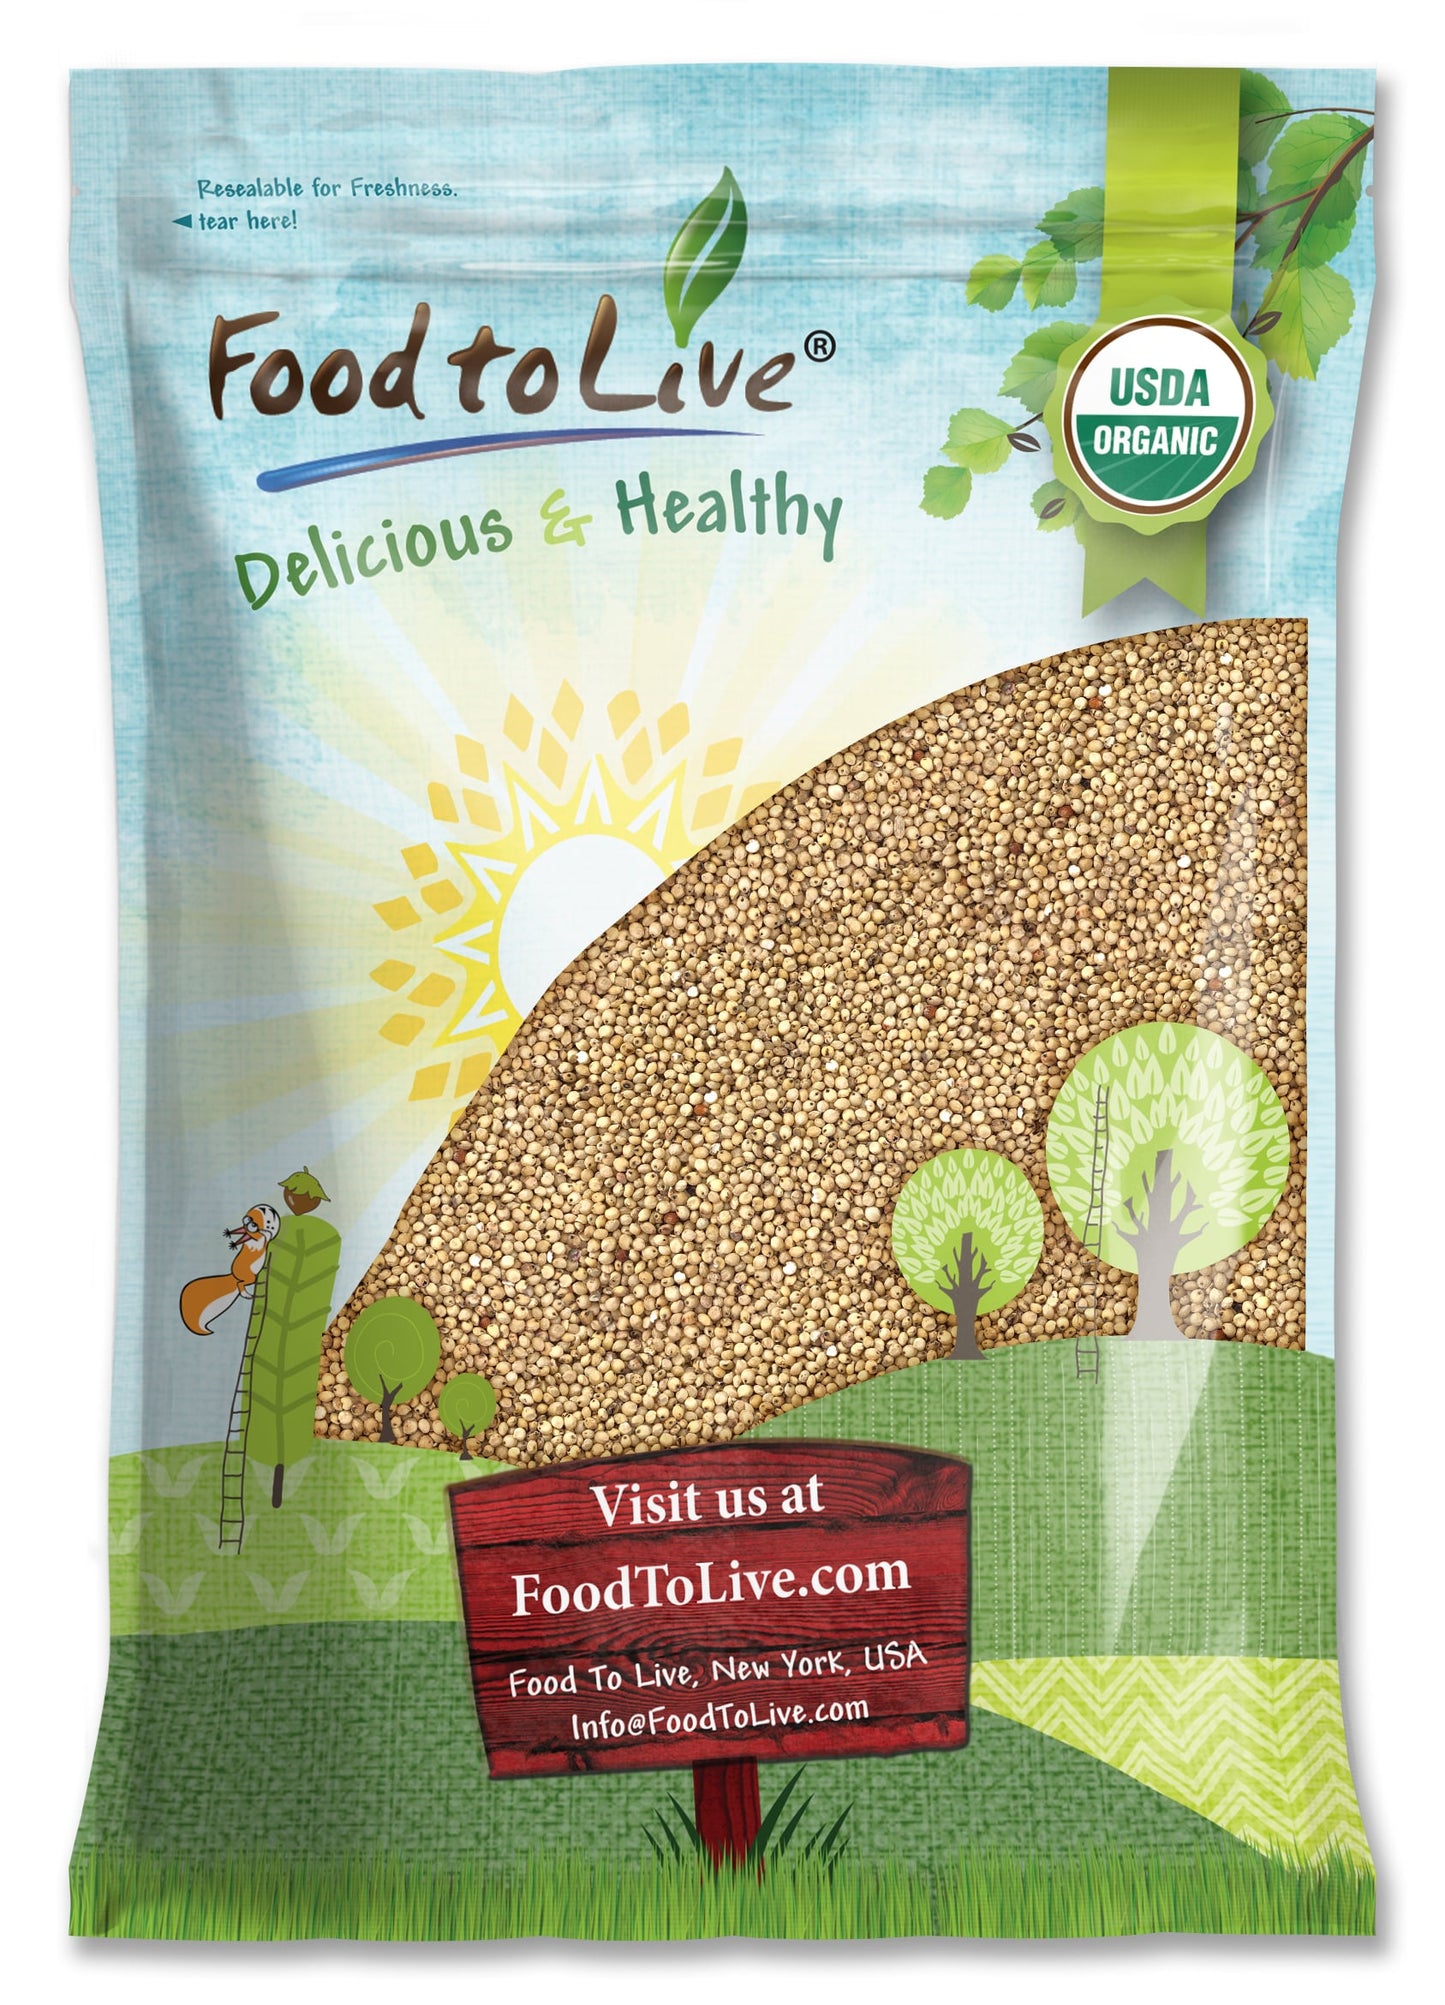 Organic Whole Grain Sorghum — Non-GMO White Groats. Raw Milo Seeds. Vegan, Bulk Broom-corn. Durra is Great for Making Flour and Popped Jowar Dhani — by Food to Live